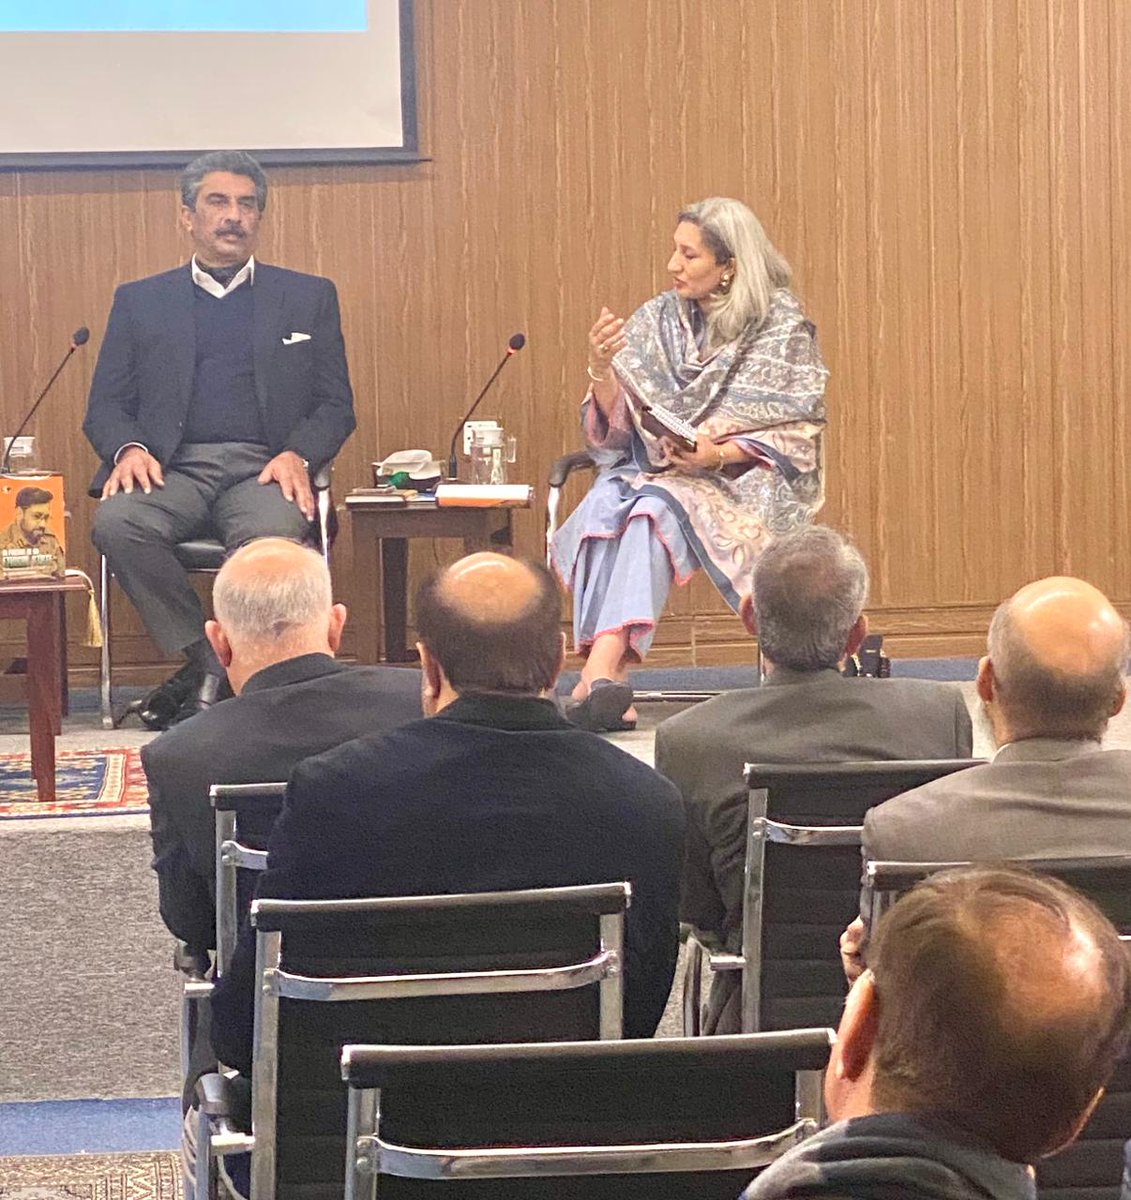 Introspection & fascinating discussion of Dr @KaleemImam 's book launch @IRSIslamabad today. Sharing the floor with IGP Afzal Shigri sb, Amb Ghalib Iqbal, pursuit of an ethical state requires rule of law, respect for constitution & not so chosen ones but those who are committed